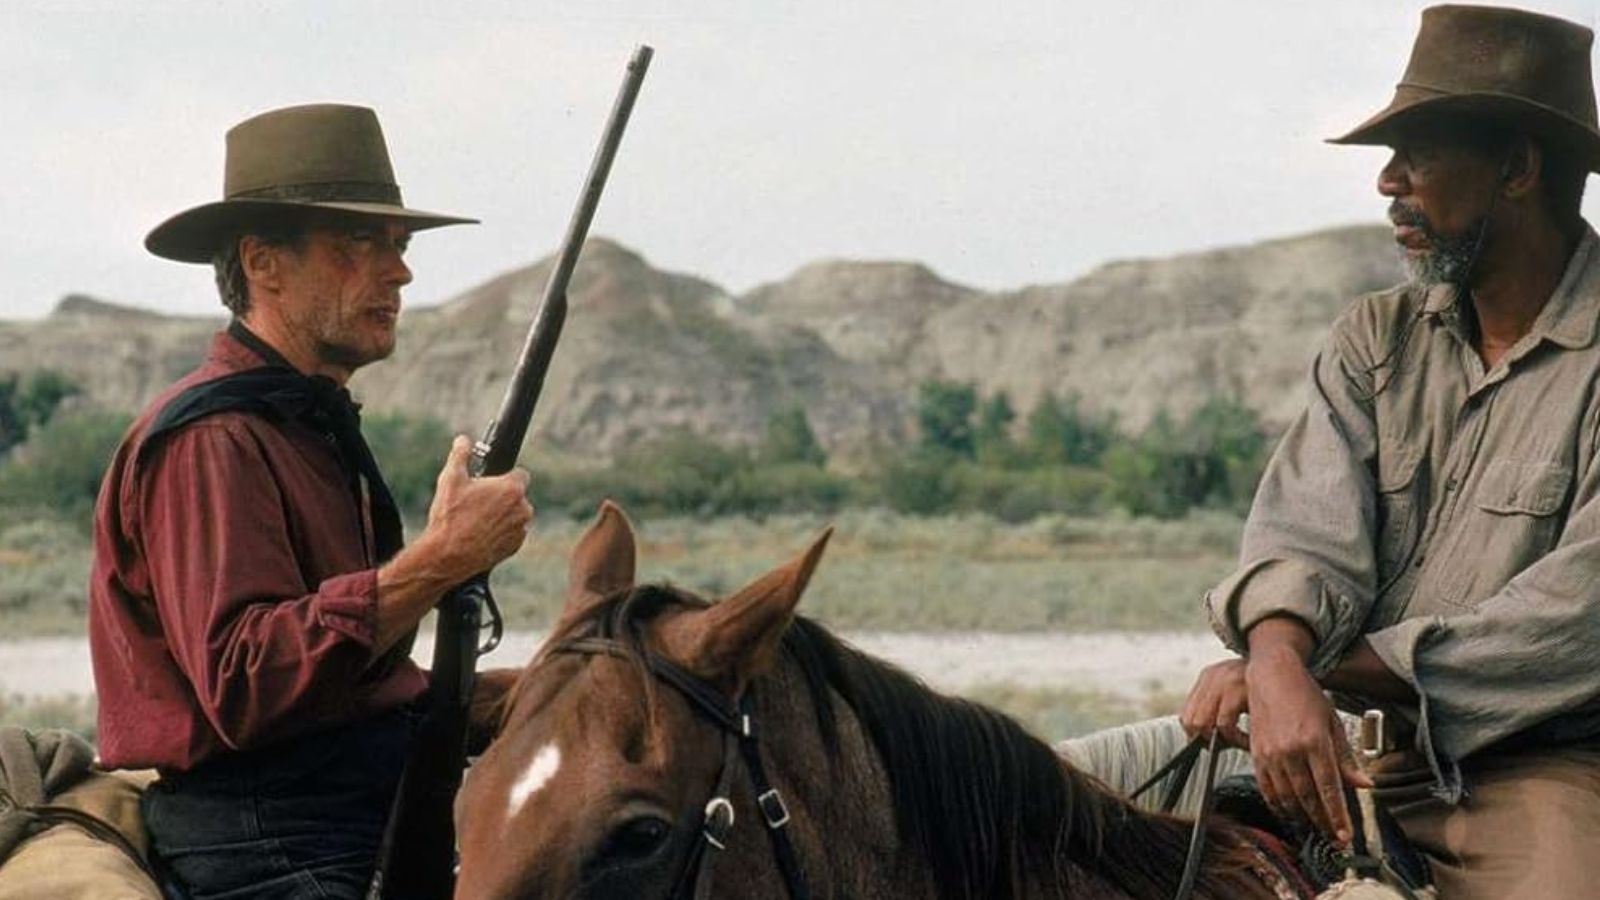 Unforgiven stars Clint Eastwood as an aging outlaw convinced to do one last job. Initially on a mission for revenge on behalf of the bounty setters, it soon gets personal, and he is pulled back into the world of violence and danger.